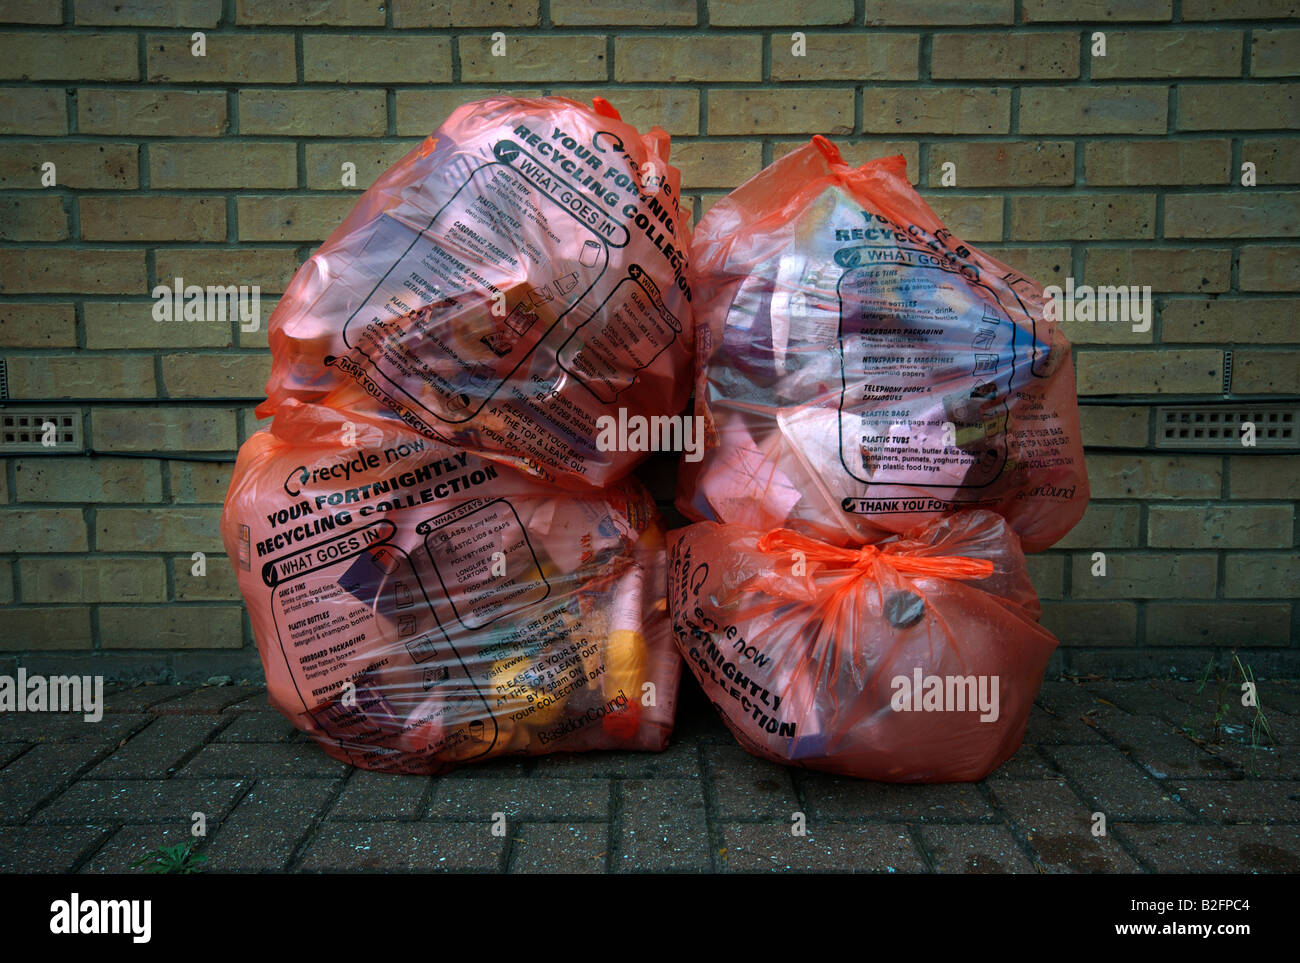 Recycling bags containing rubbish out for collection. Stock Photo